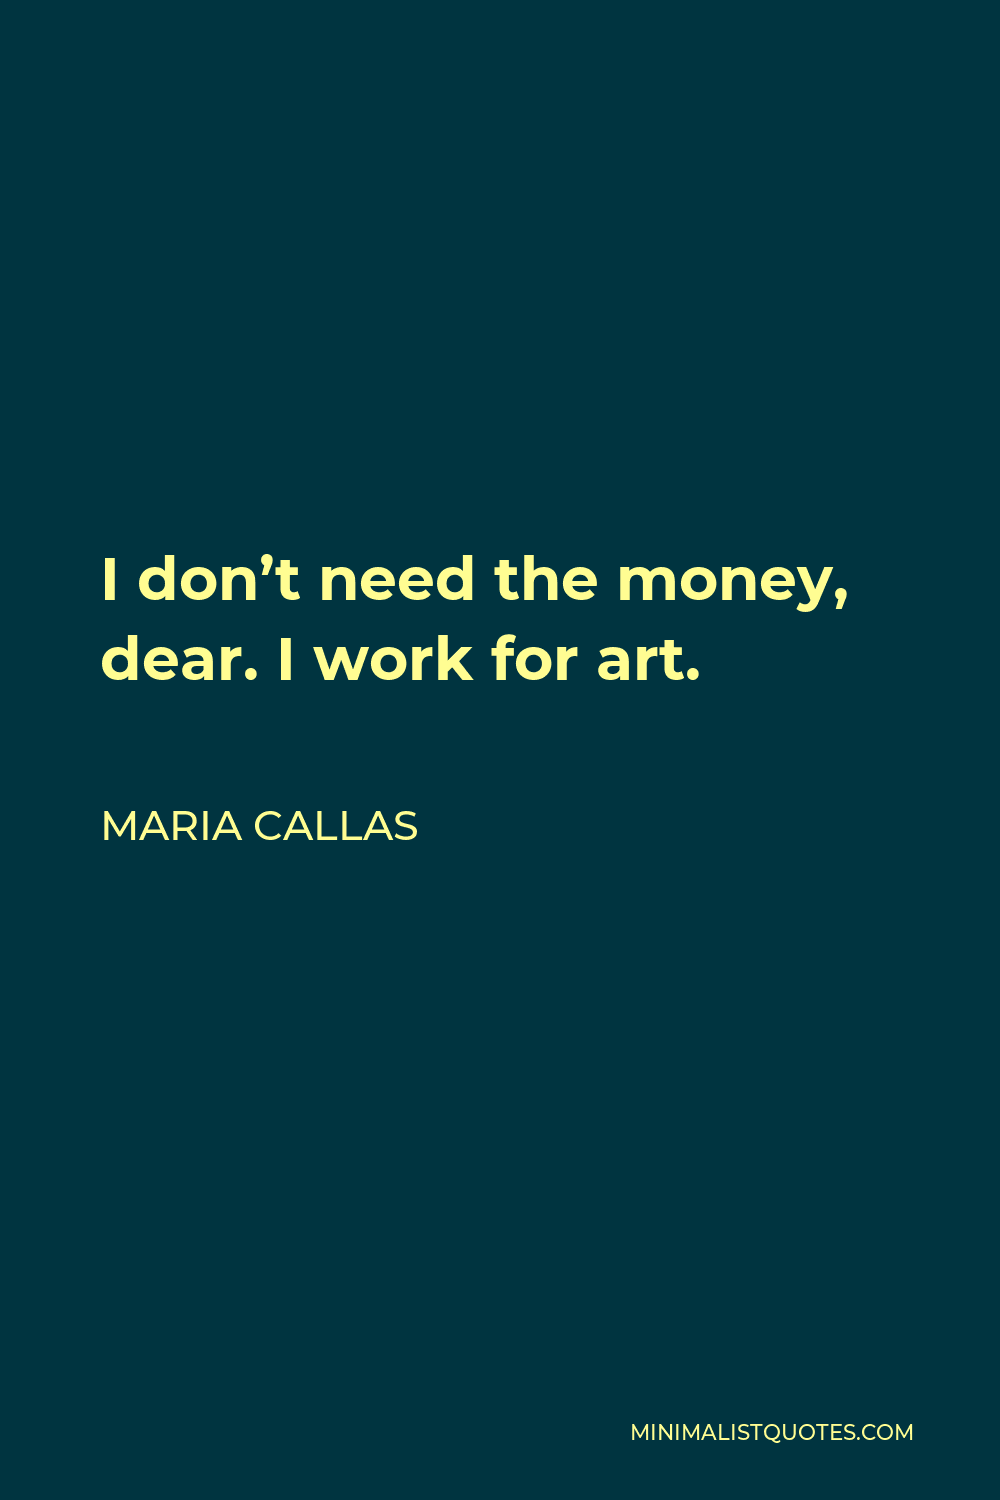 Maria Callas Quote - I don’t need the money, dear. I work for art.